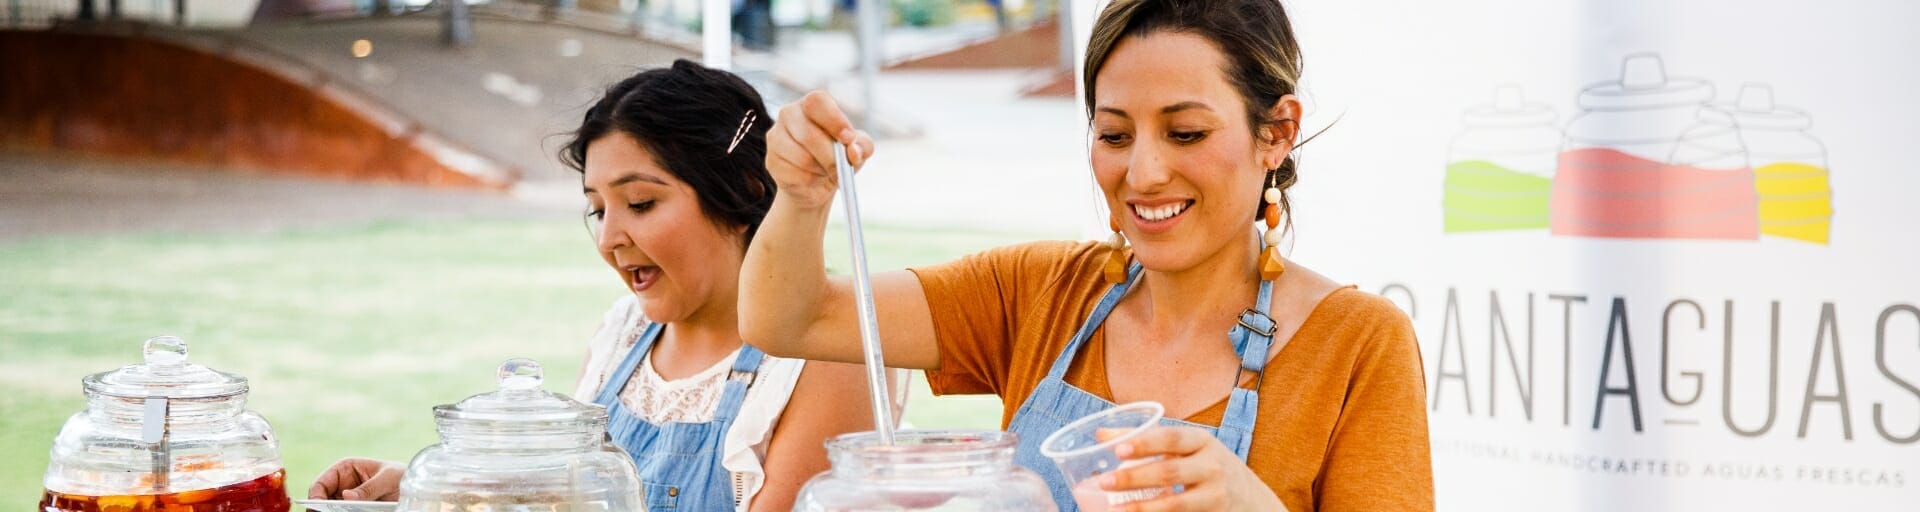 
		Two women work at their mobile food business serving handcrafted aguas frescas.		